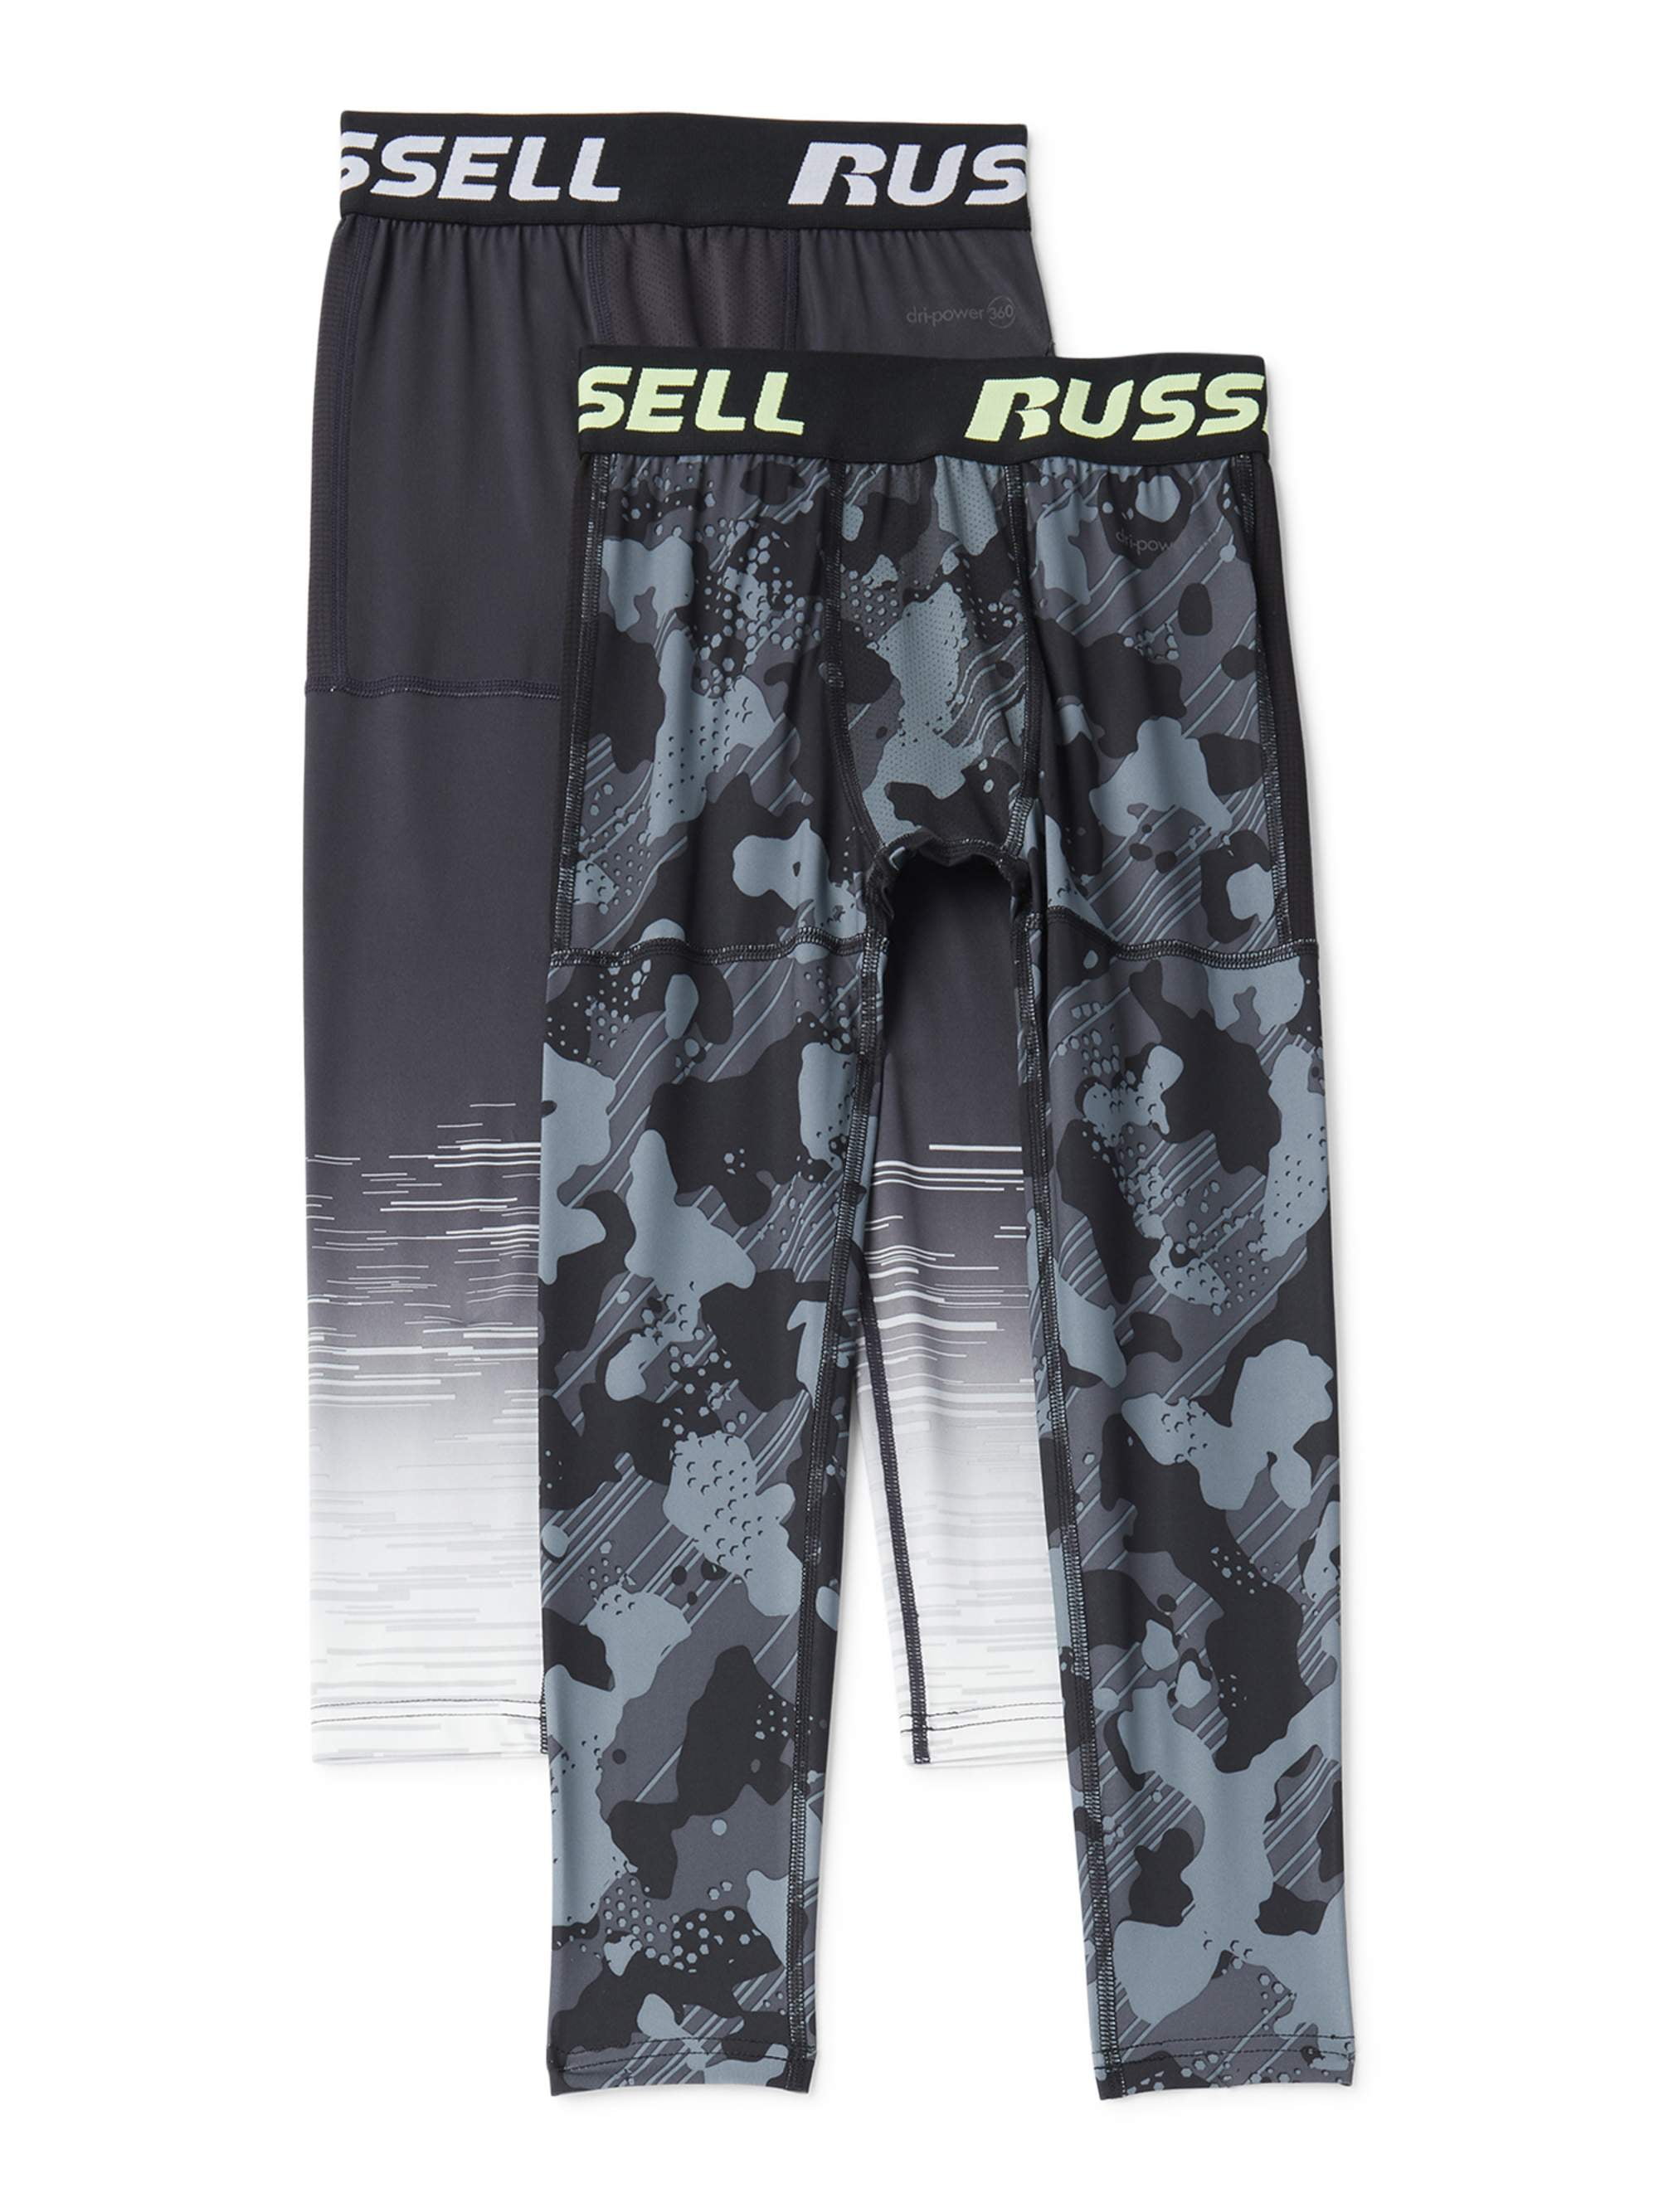 Russell Athletic Mens Big and Tall Dri-Power Short with Contrast Side Panel